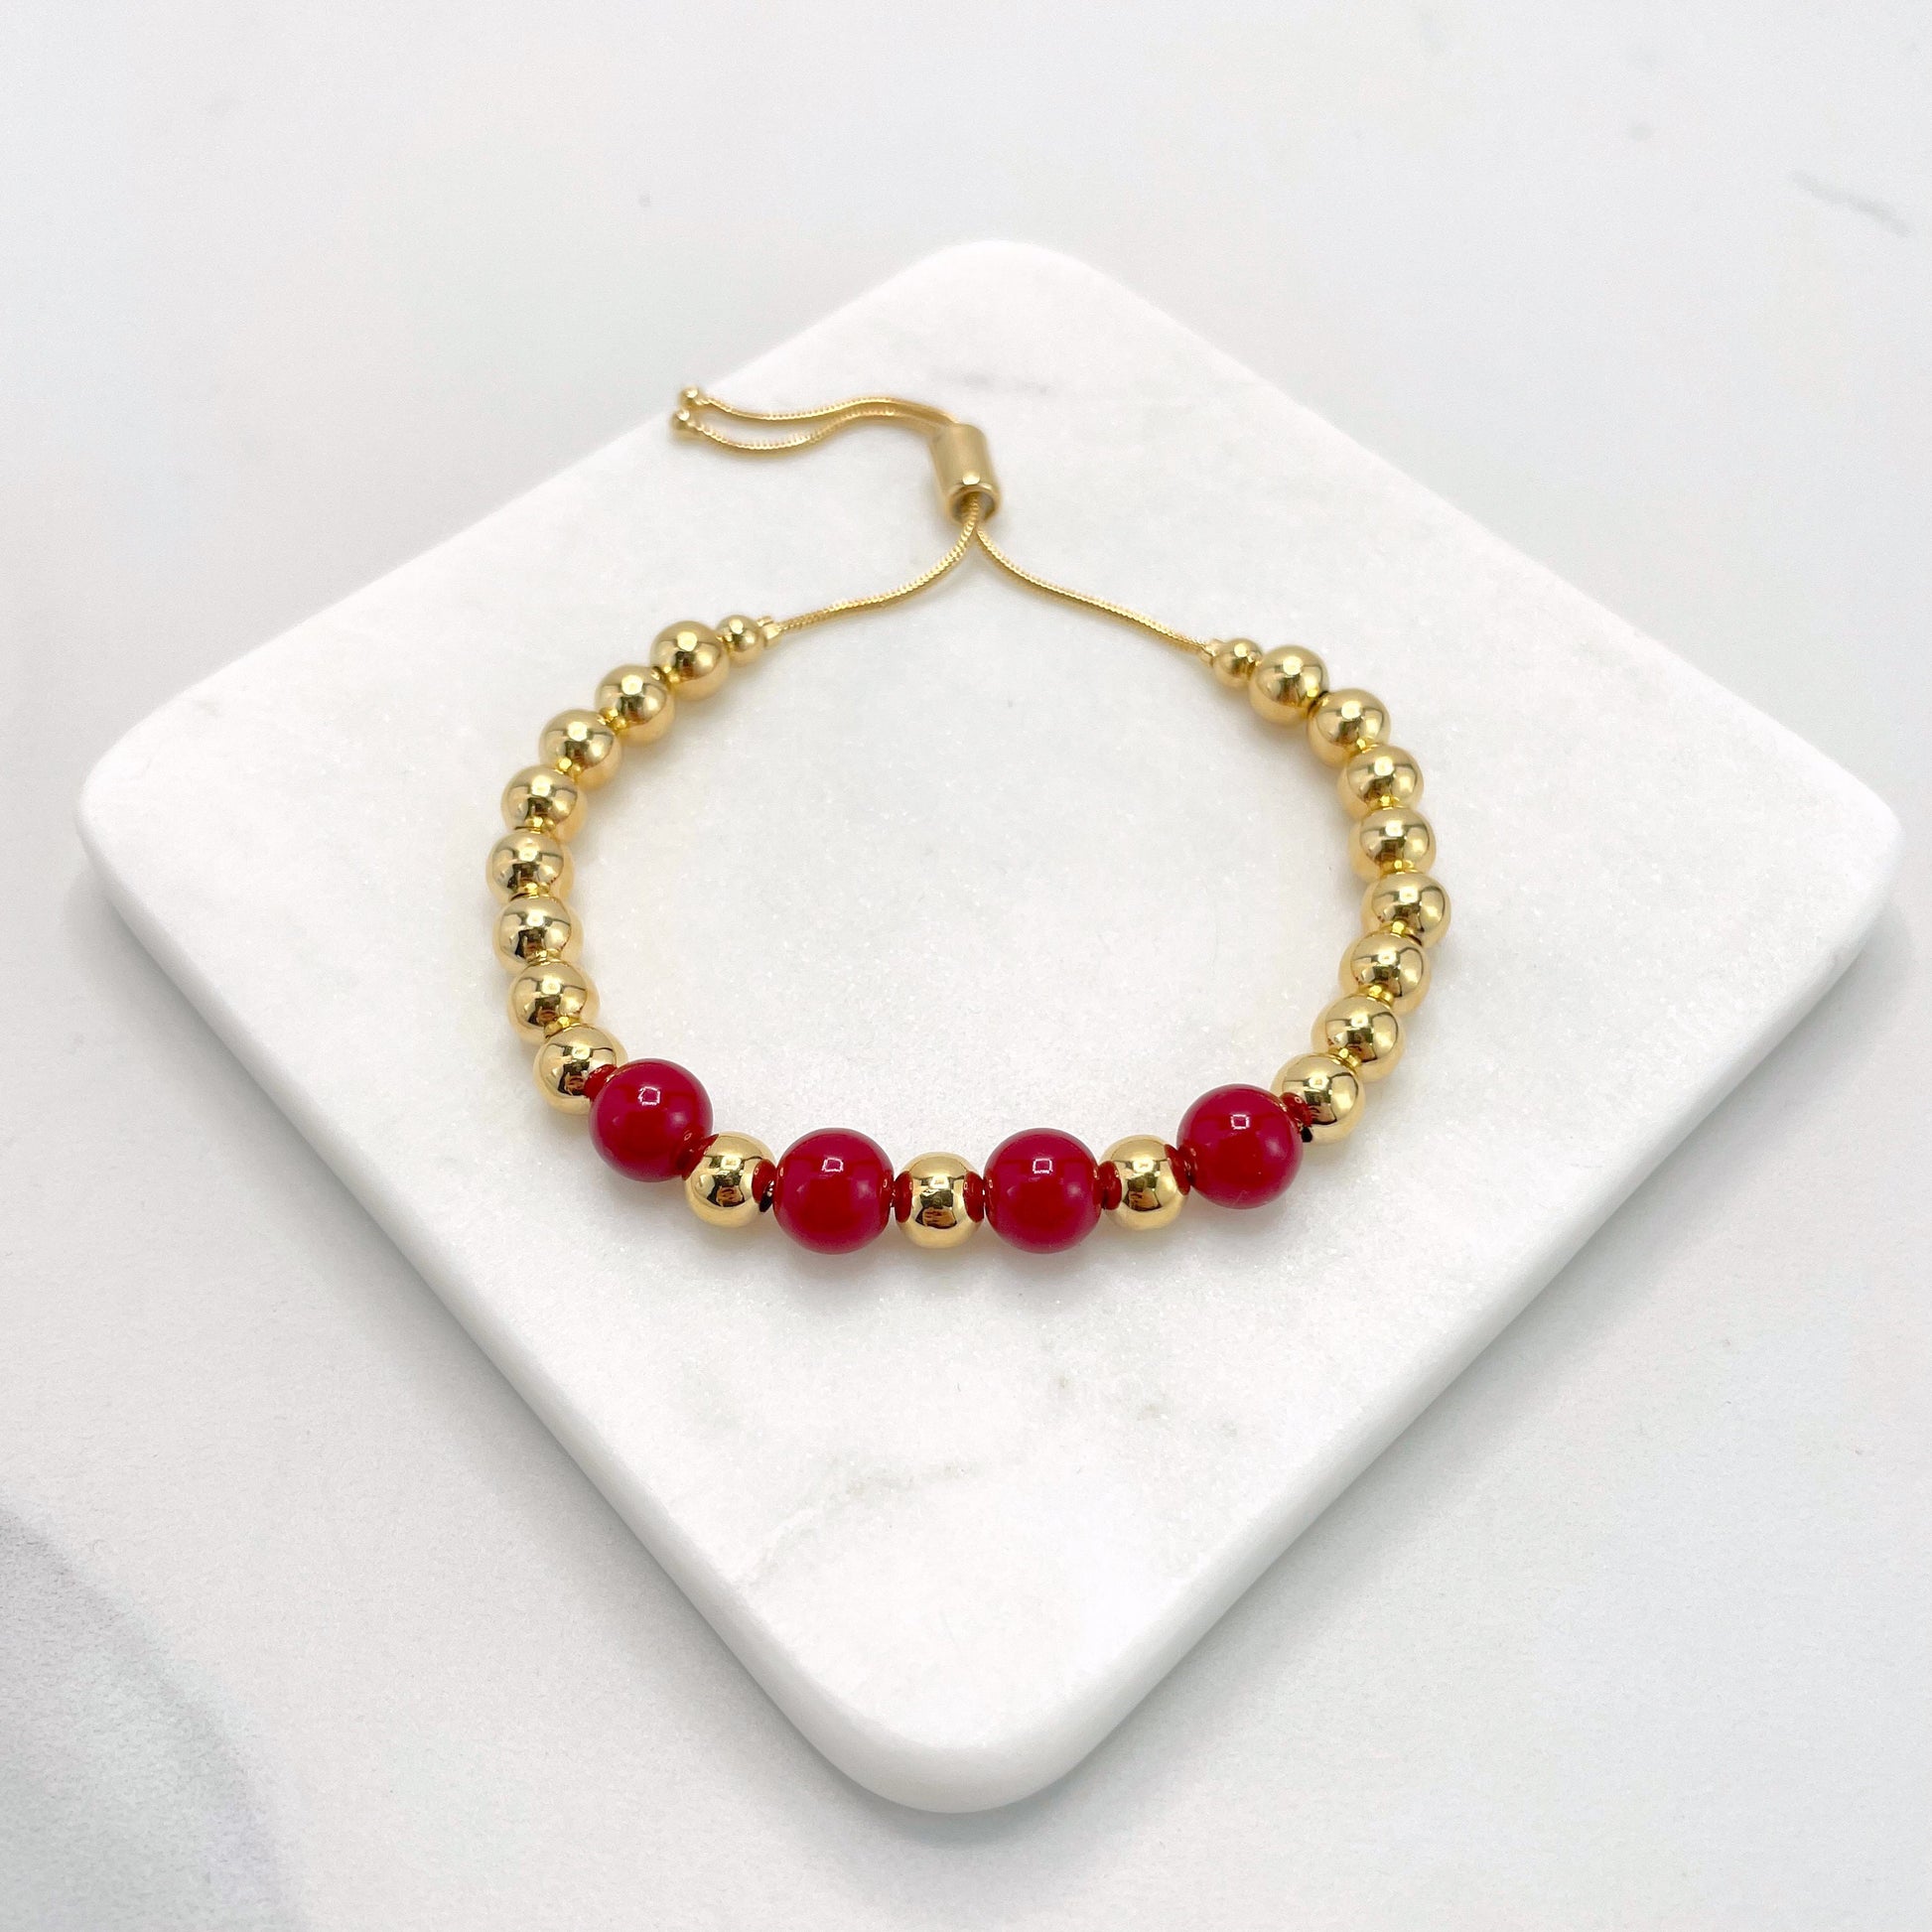 18k Gold Filled 1mm Box Chain Bracelet Adjustable Slide Clasp Featuring Red Ball, Wholesale Jewelry Making Supplies